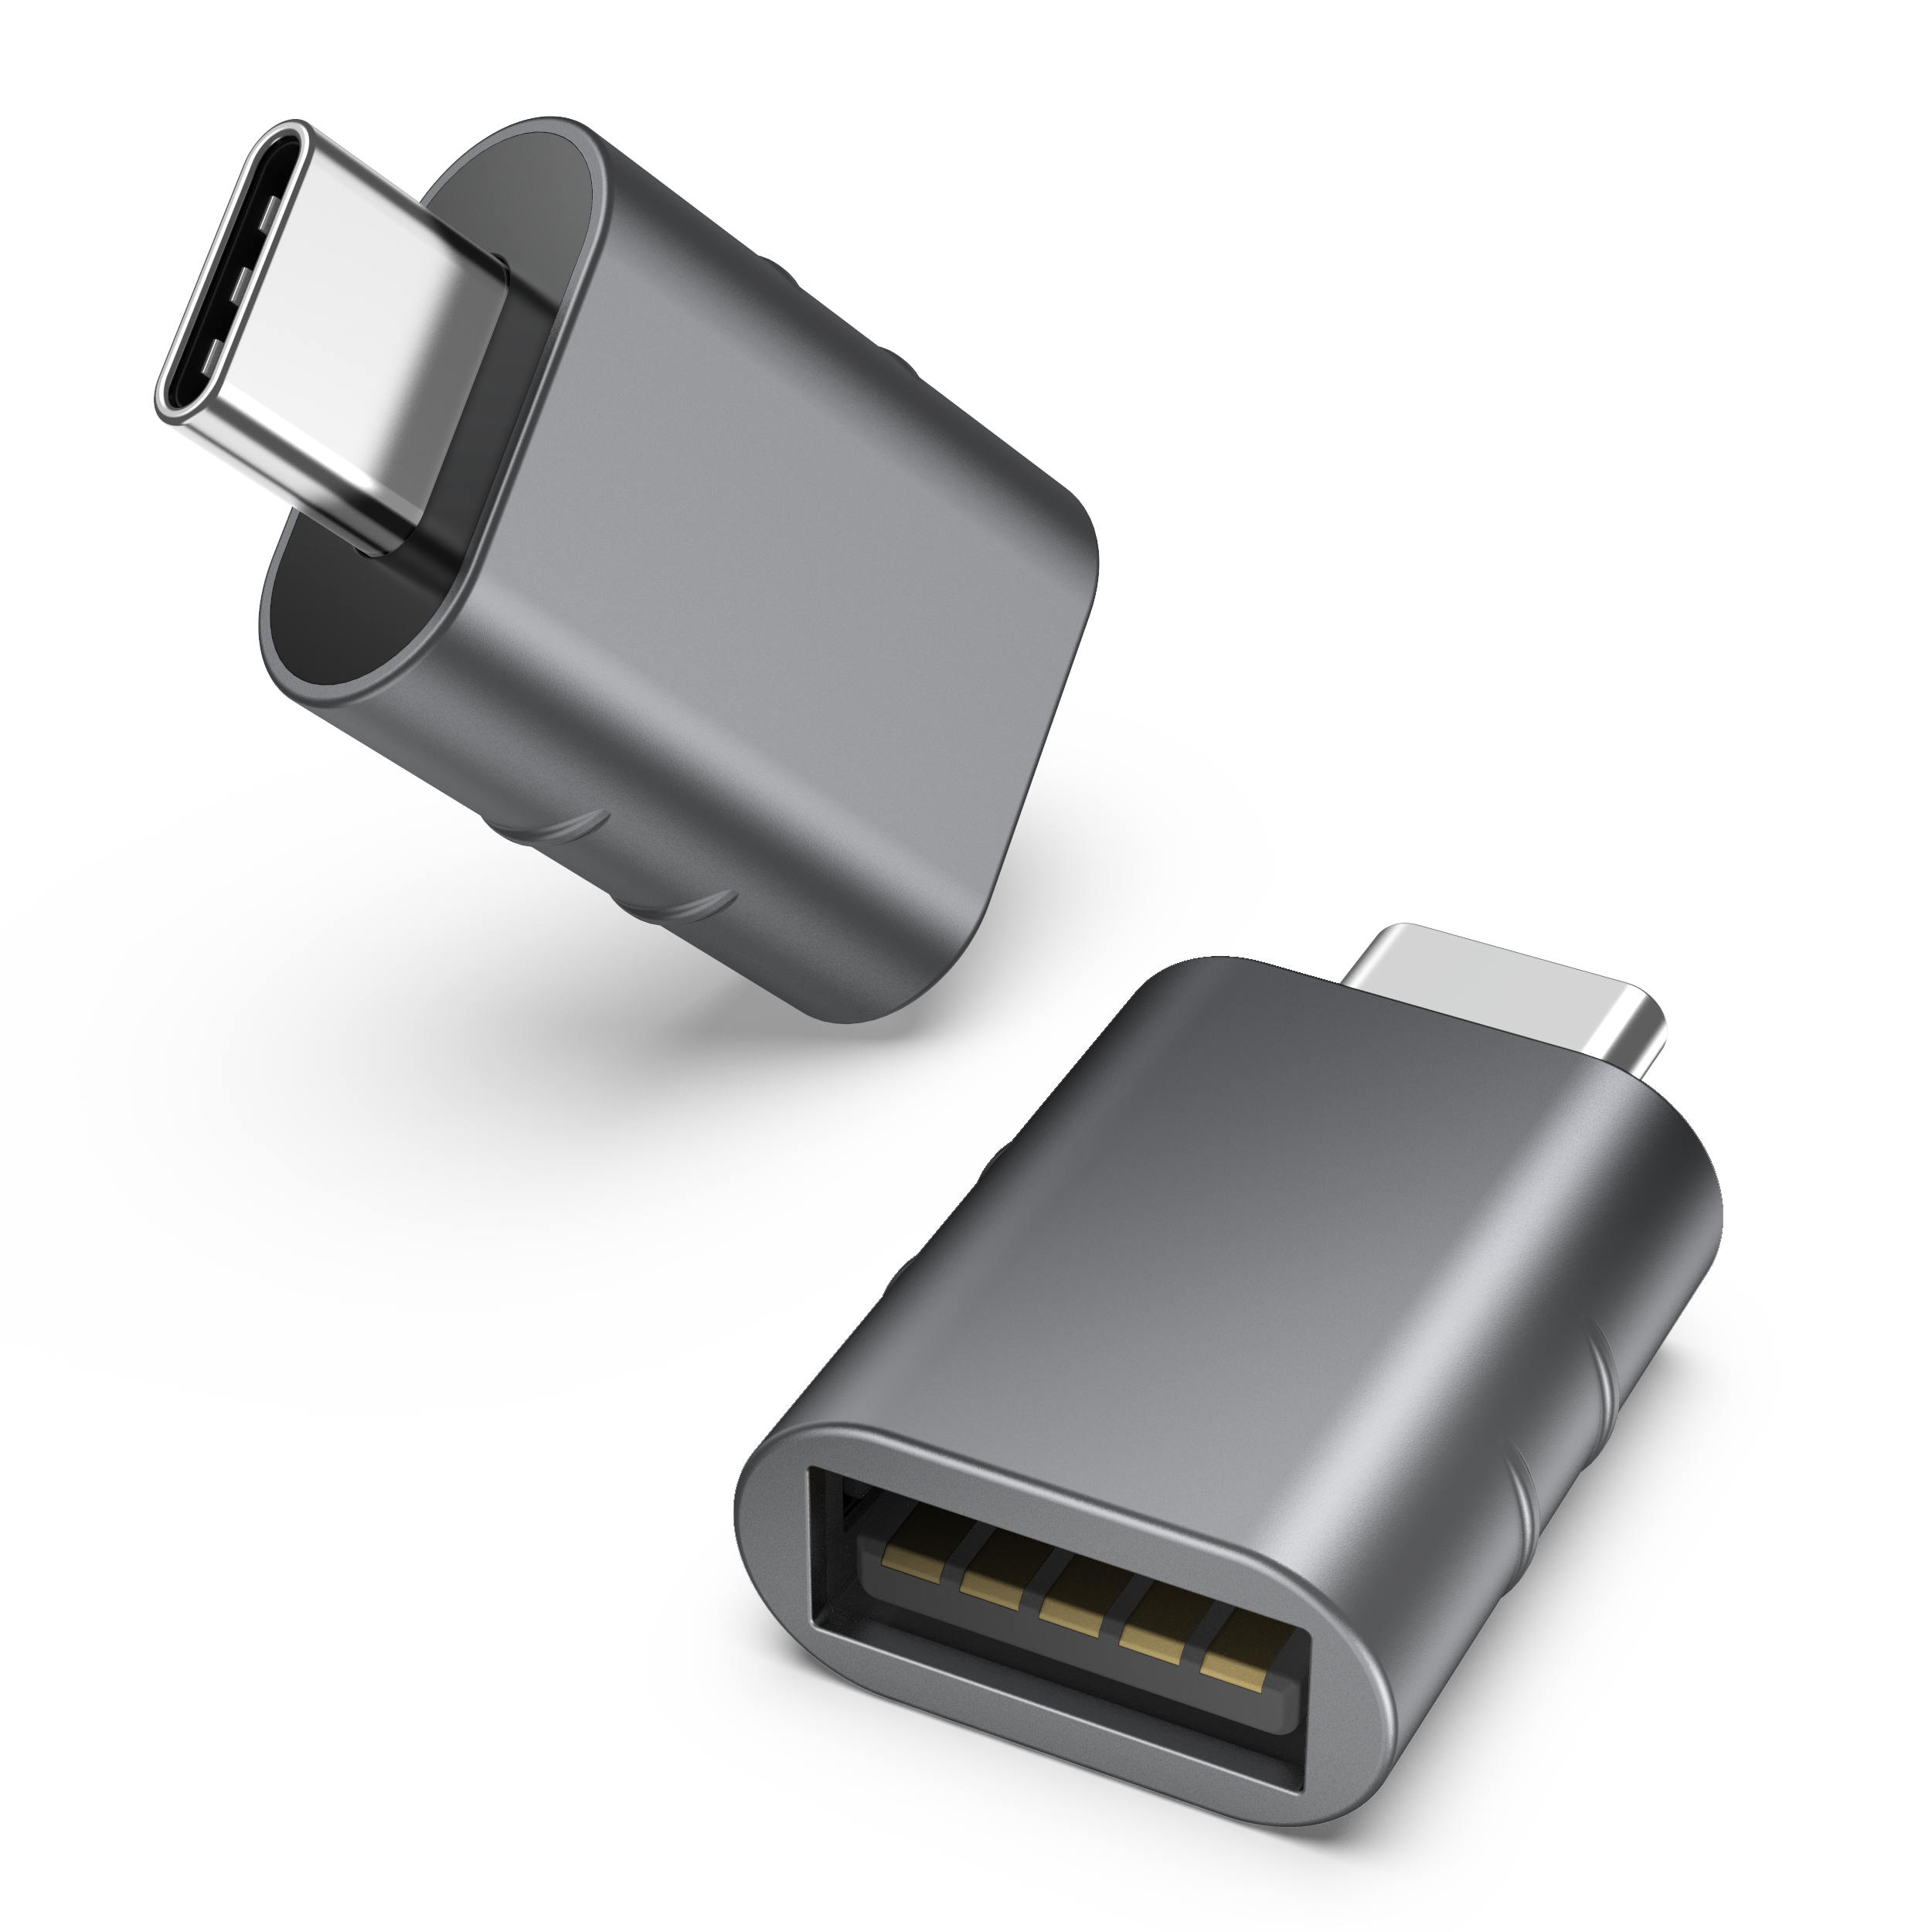 C to USB Adapter Pack of 2 USB C Male to USB3 Female Adapter